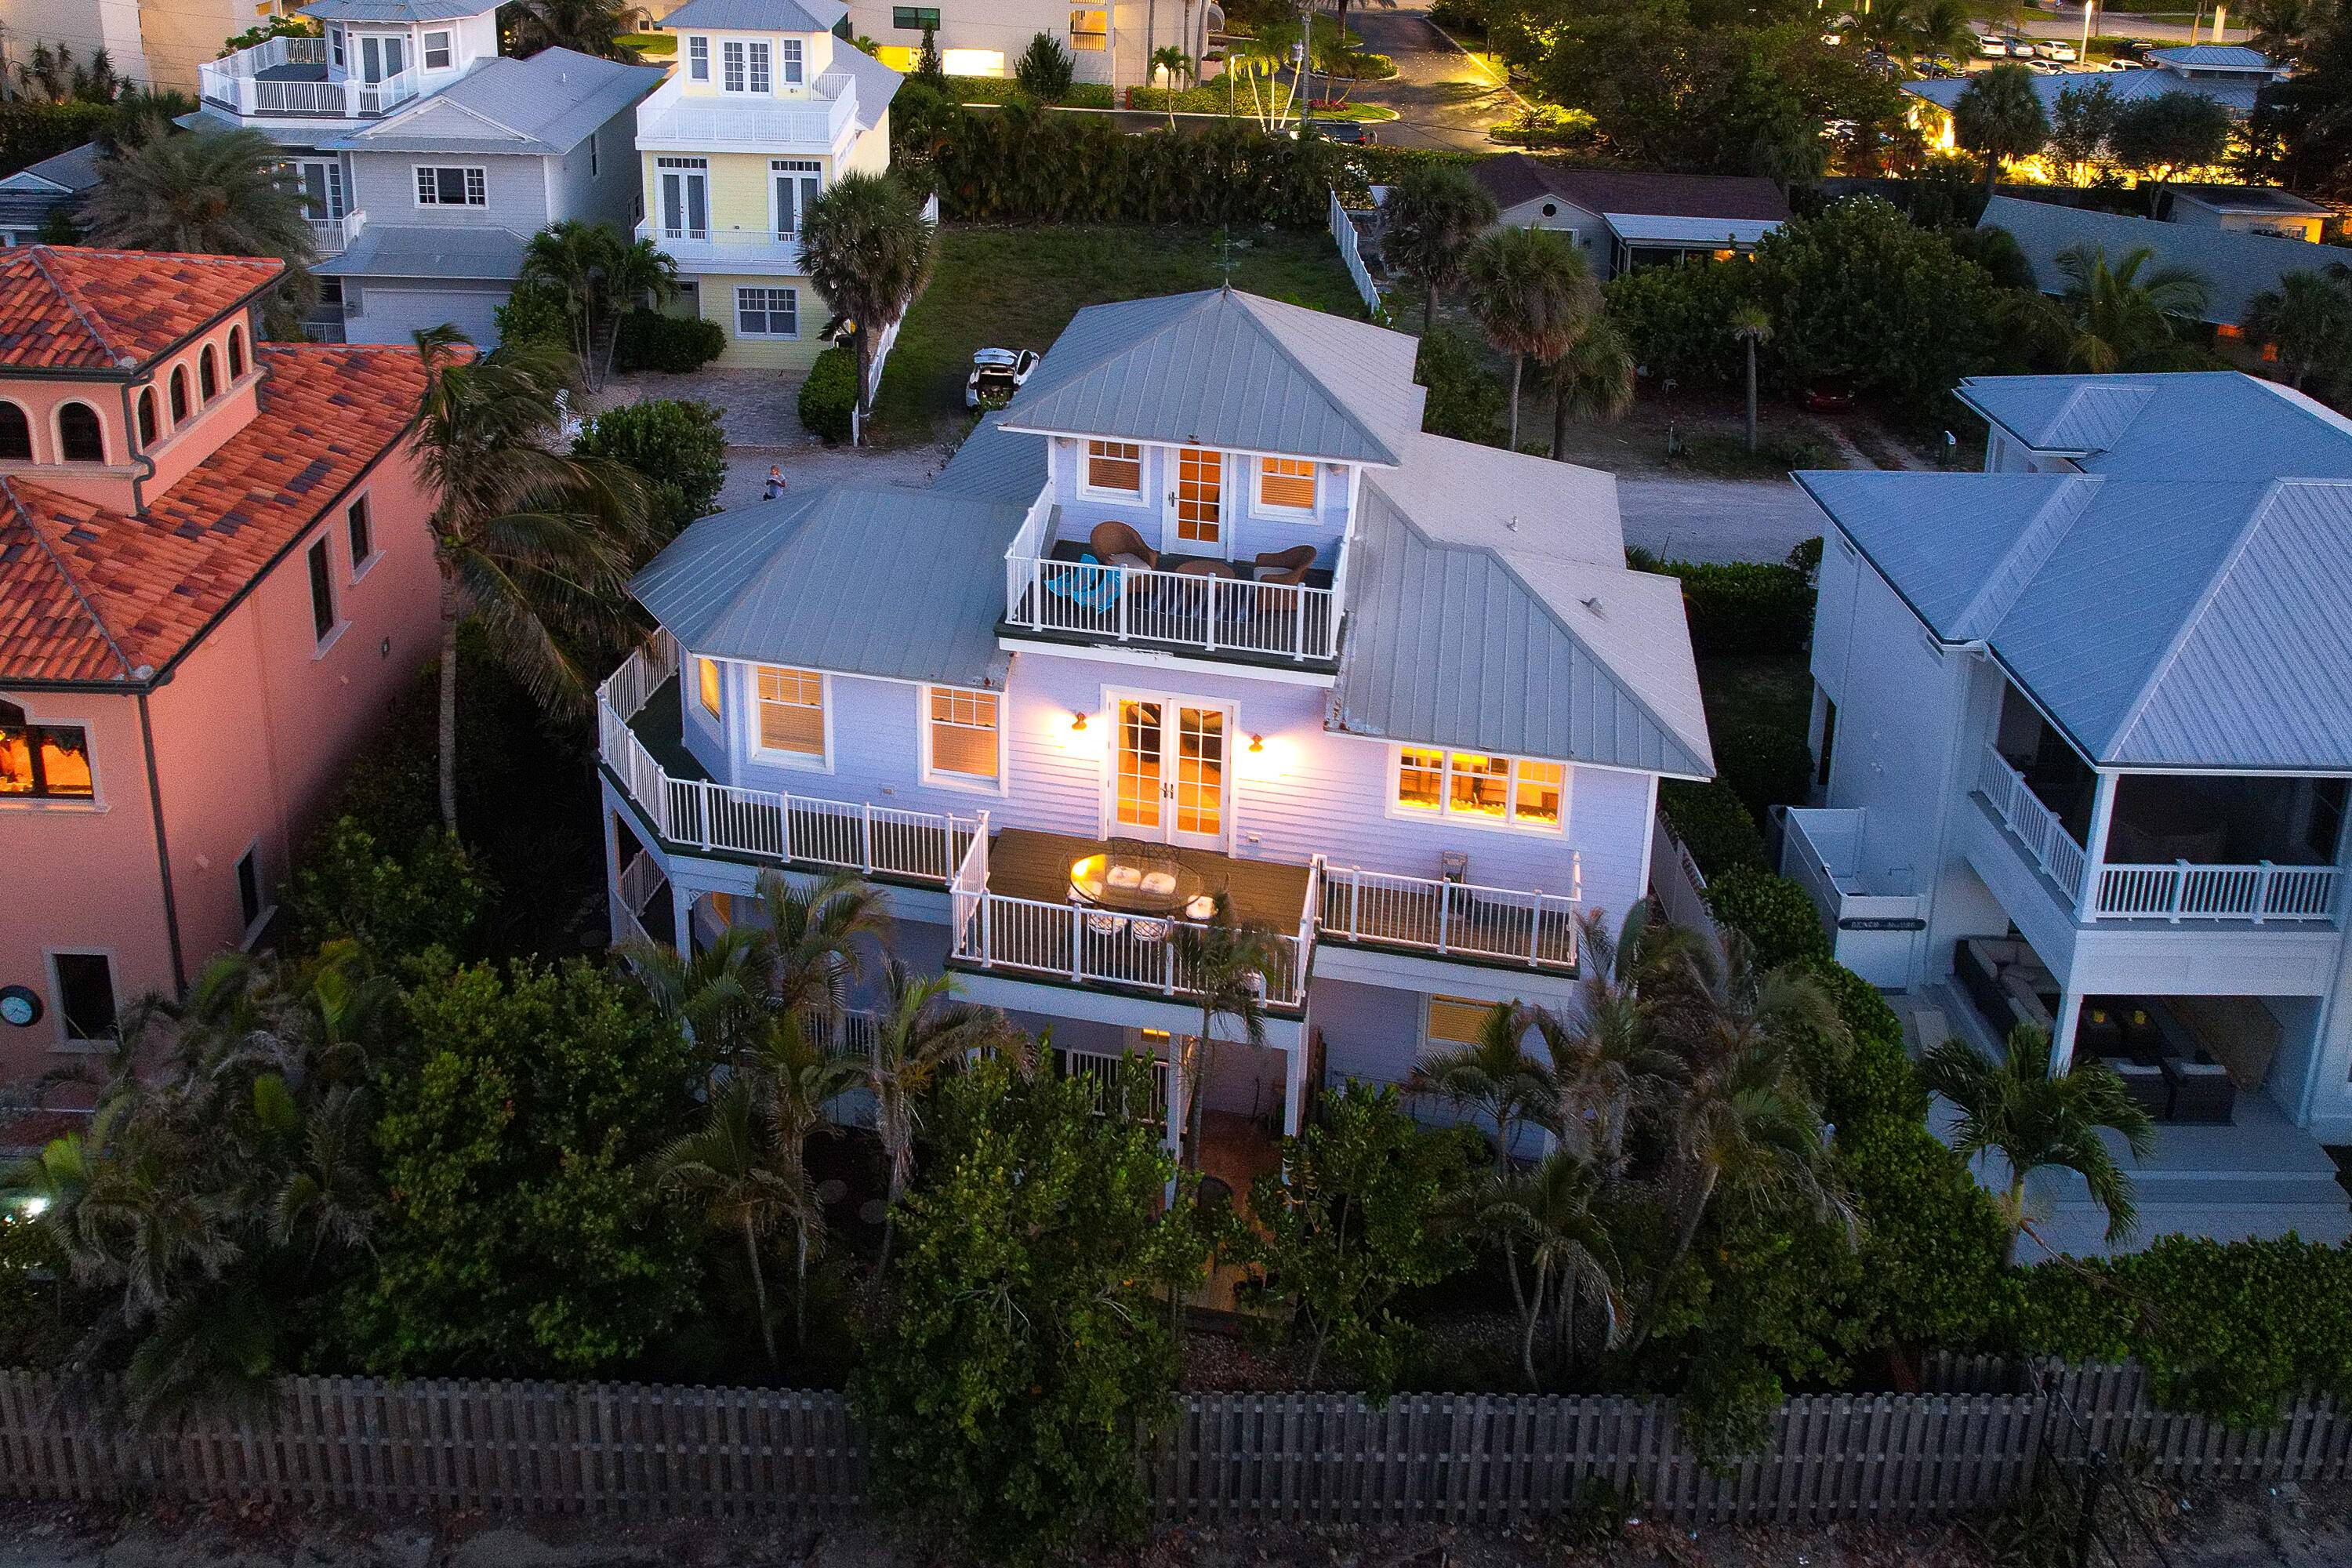 Introducing your perfect coastal haven, a remarkable three story retreat that doubles as a highly profitable AirBnB.